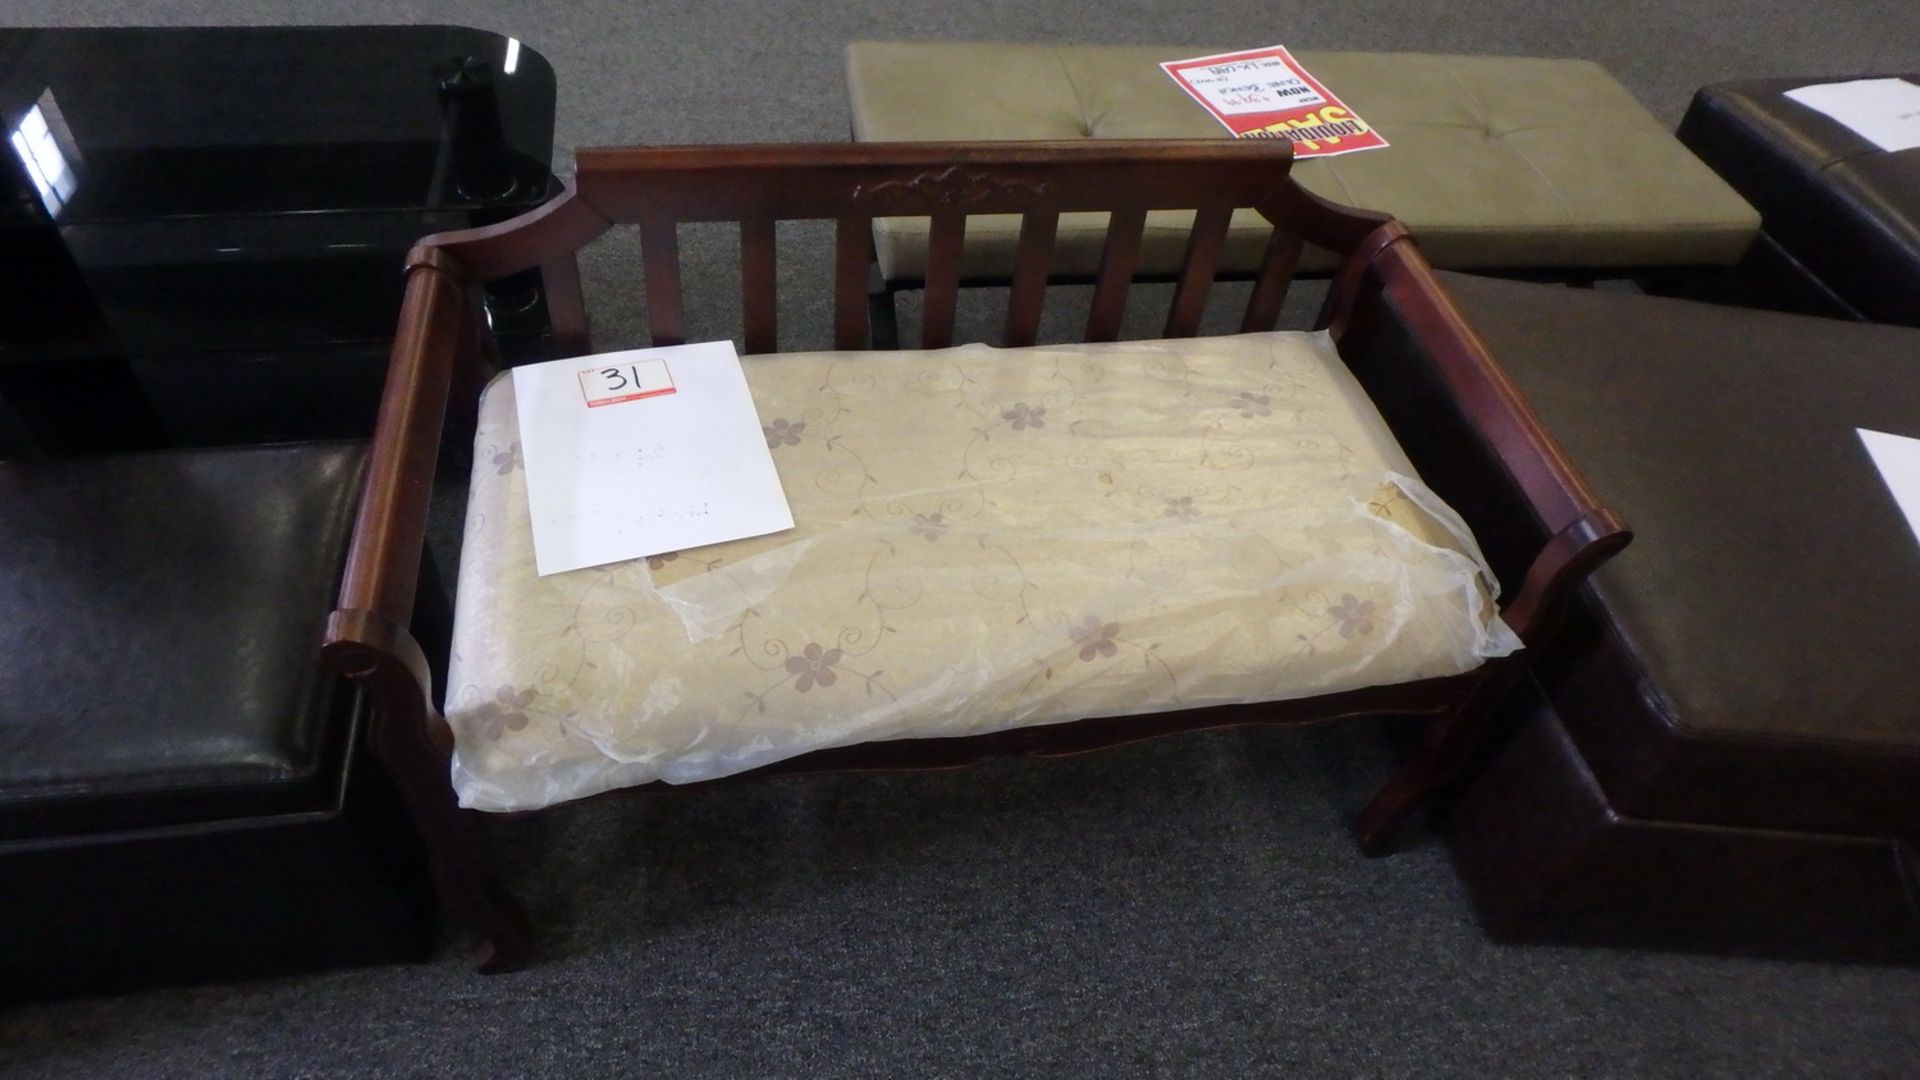 UNITS - CHERRY WOOD FRAME W/ FABRIC UPHOLSTERED SEAT APPROX. 4'L BENCH (LK-8039) (NEW IN BOX)